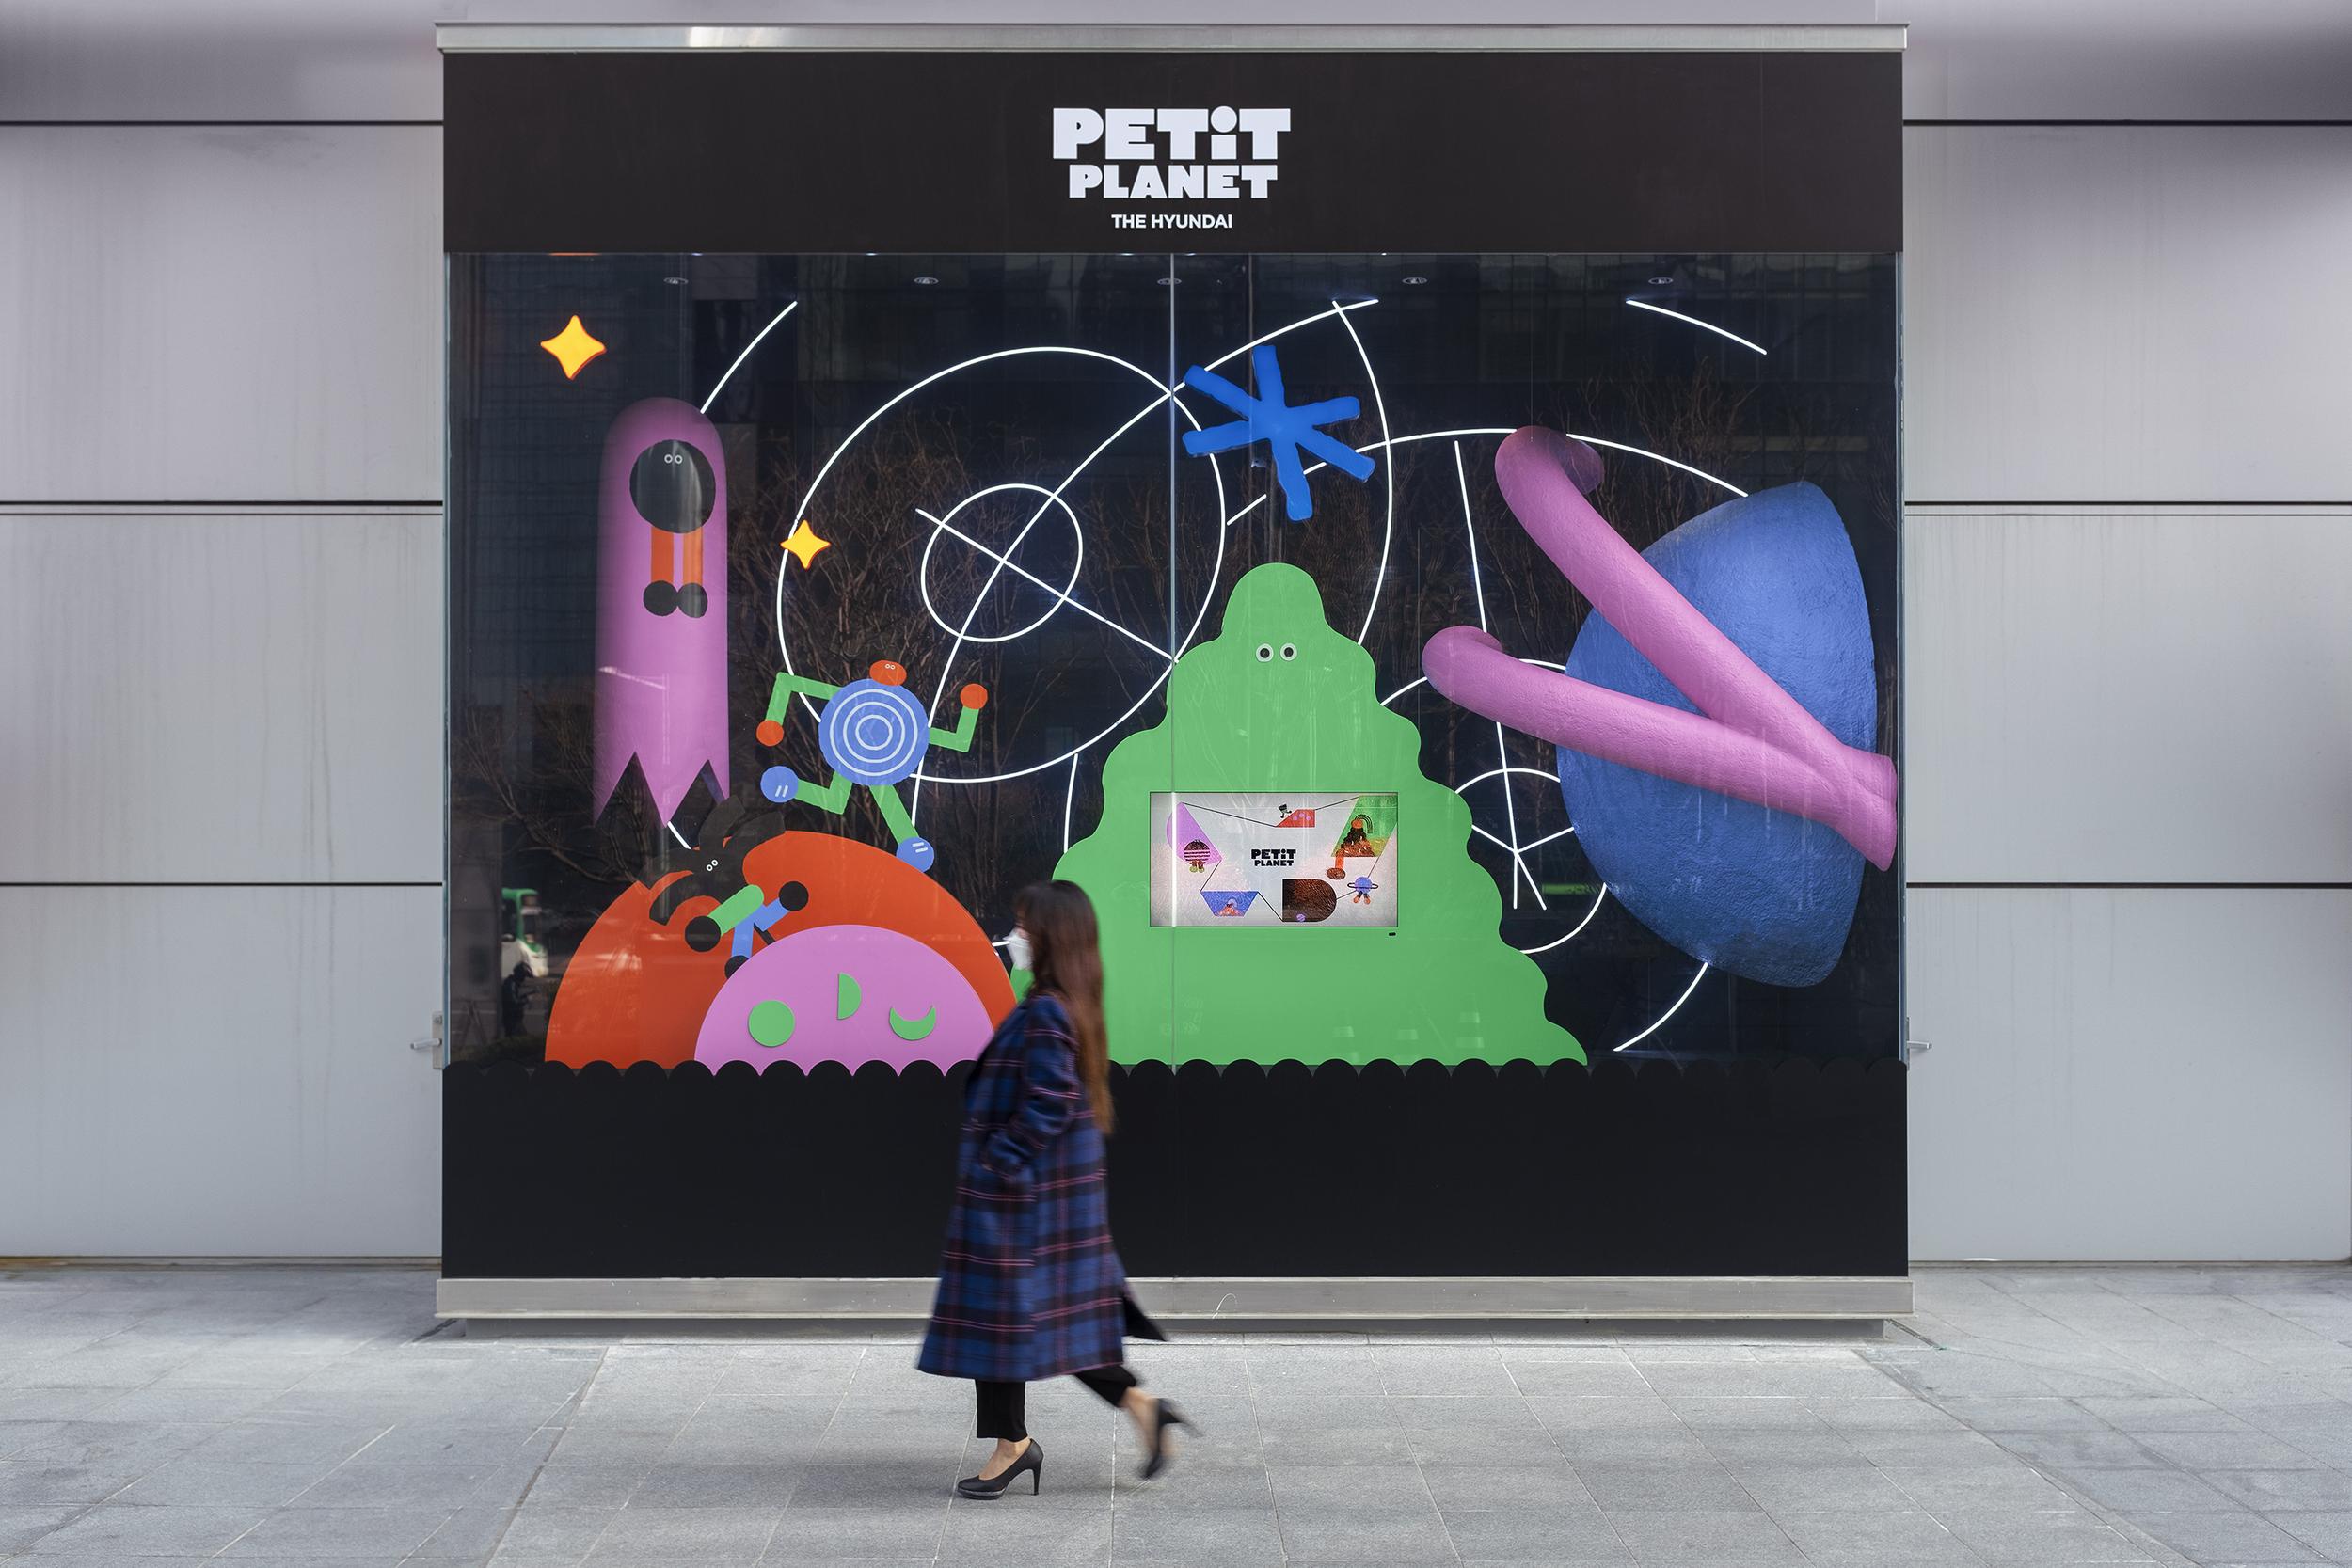 Brand identity and window display design for toy department Petit Planet at South Korean department store Hyundai. Designed by Studio fnt.